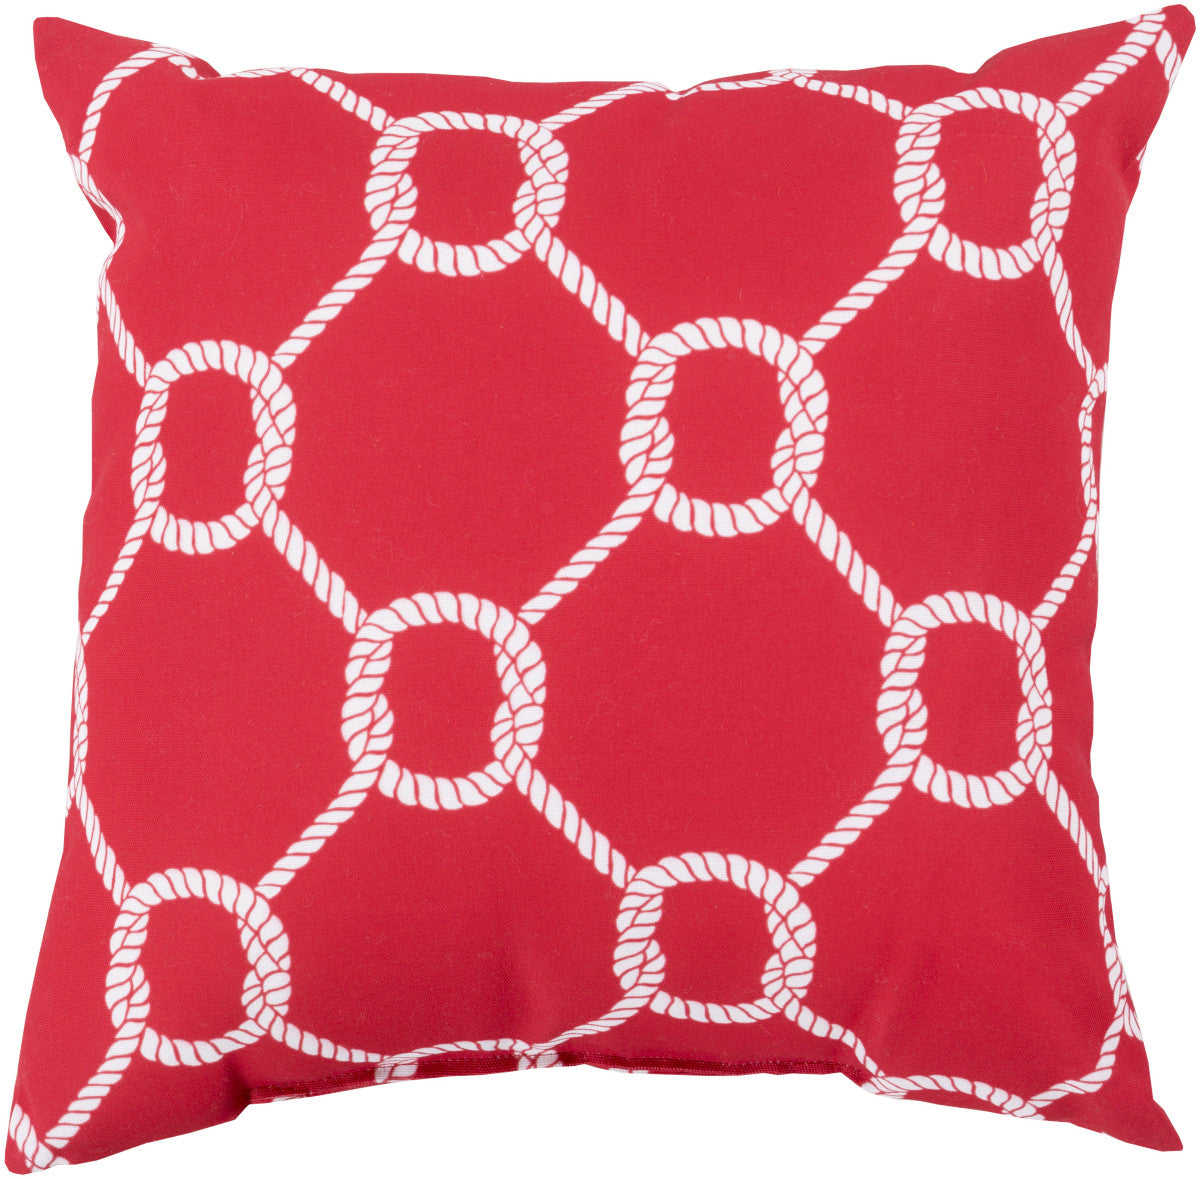 Surya Rain Tied up in Delight RG-147 Pillow